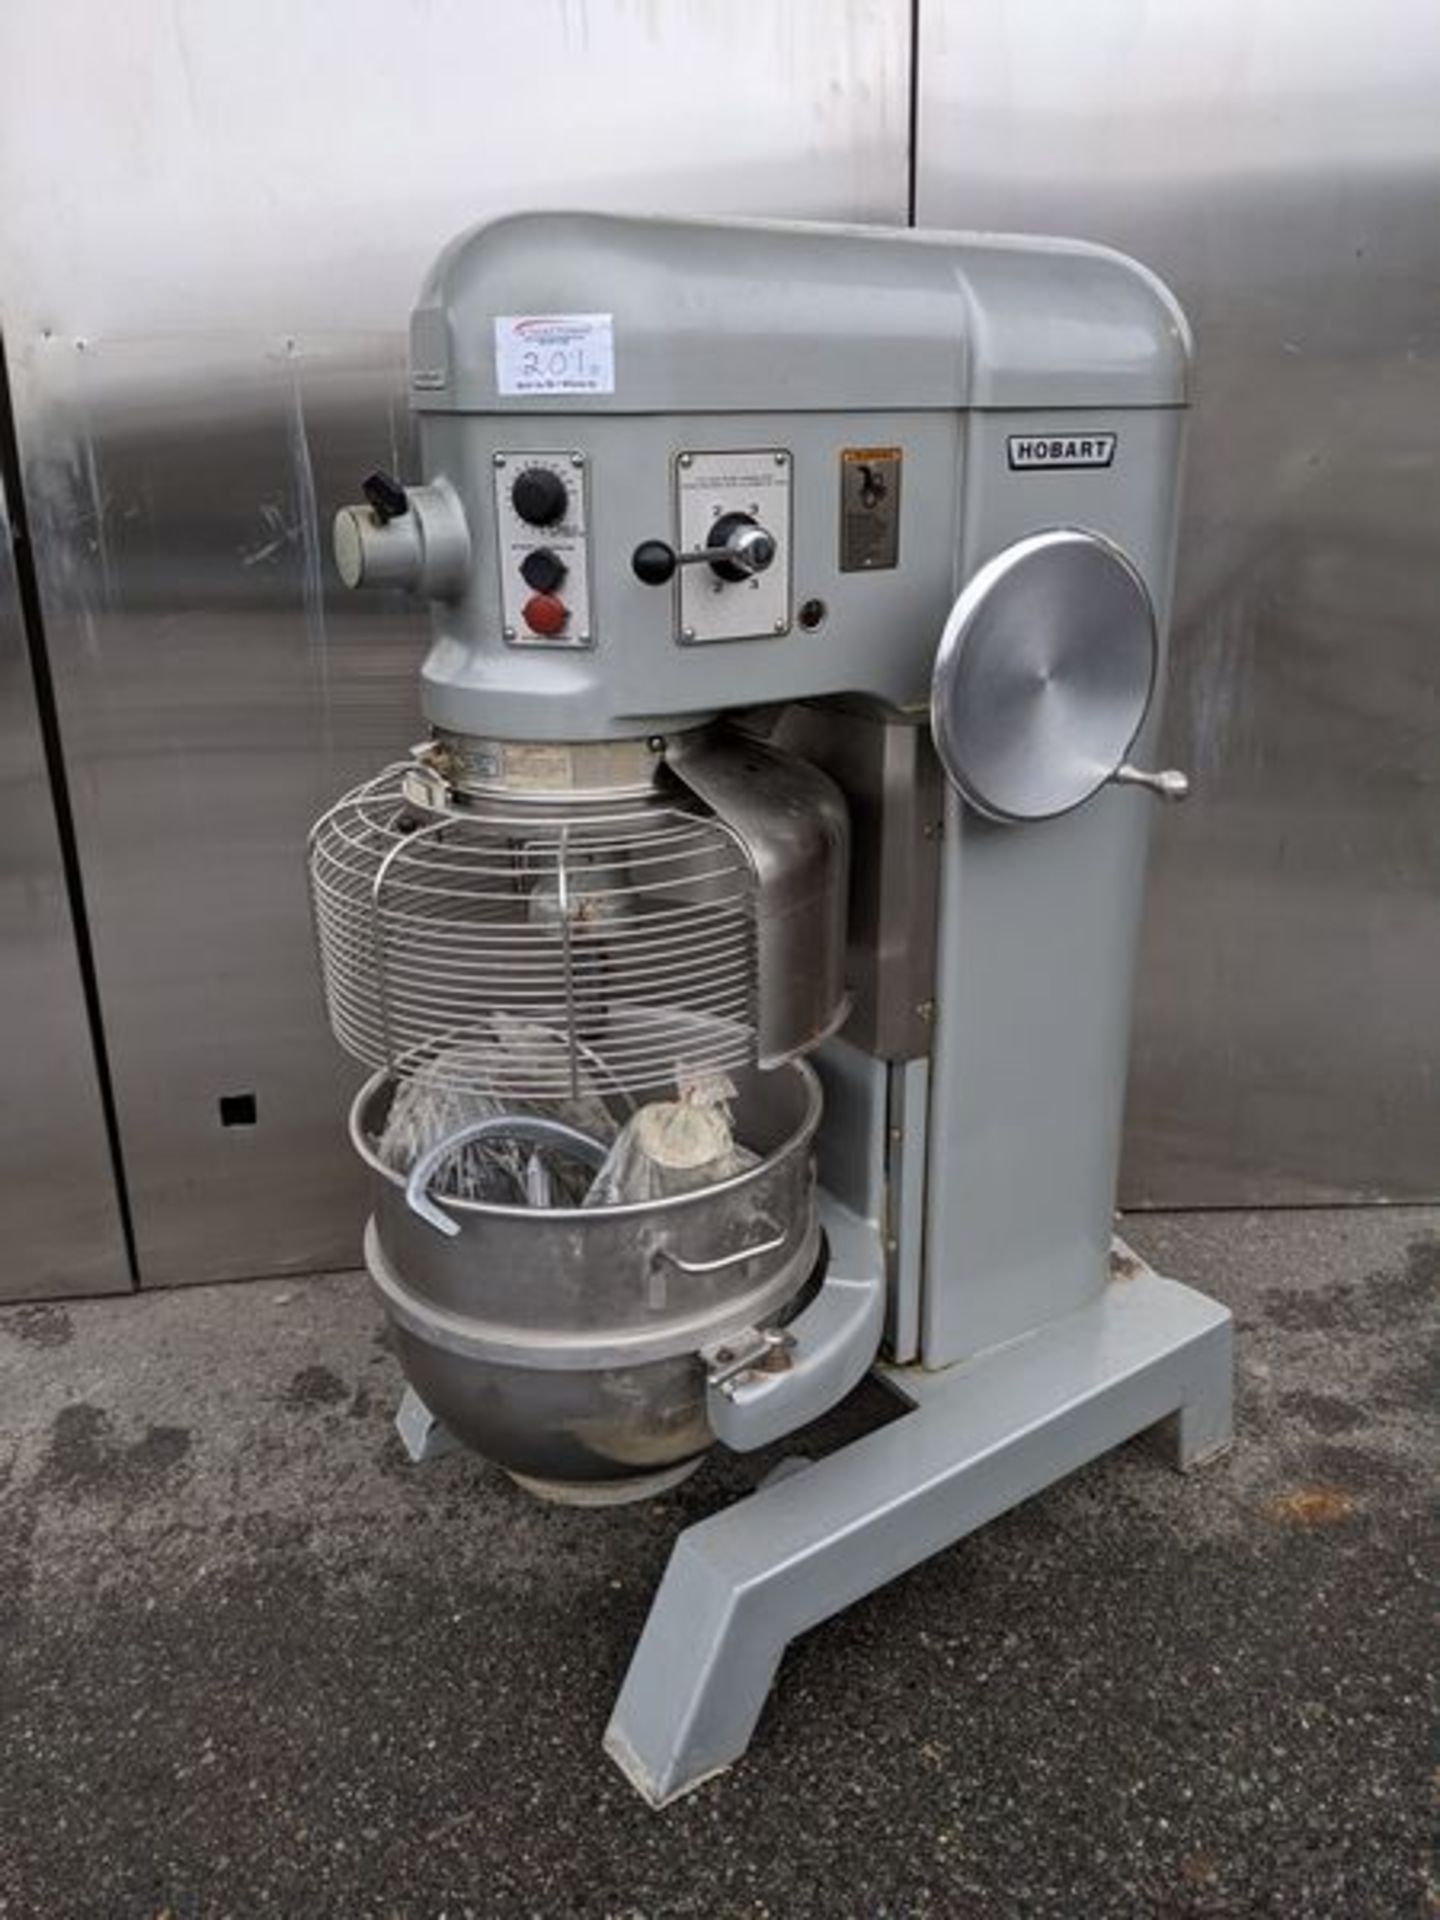 Hobart Model H-600T 60 Quart Mixer with Sizer Ring, Additional 40 Quart Bowl and Attachments